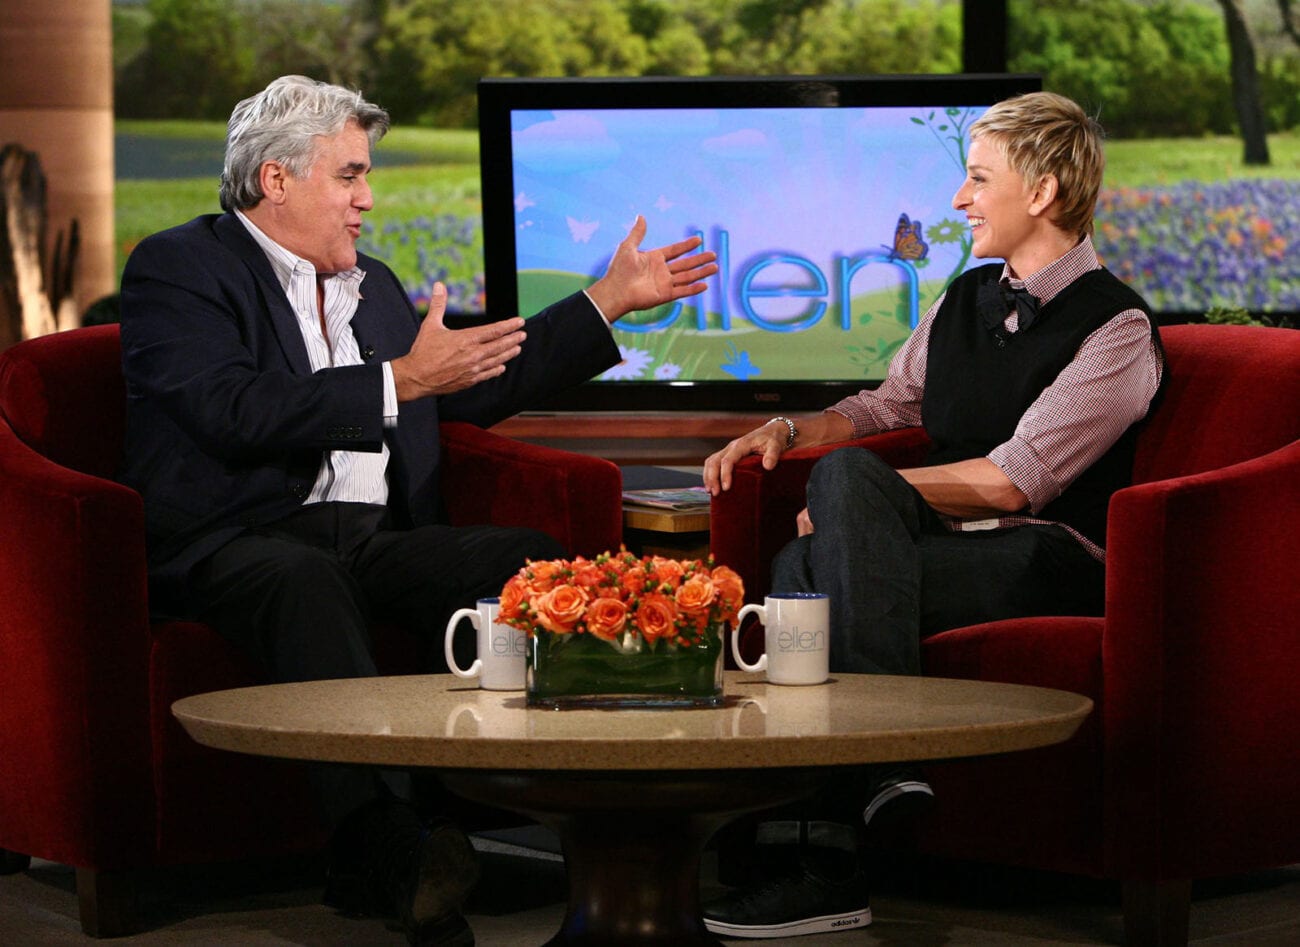 Jay Leno came to the defense of daytime talk show host Ellen Degeneres amid allegations. What about Leno's net worth? Let's take a look.